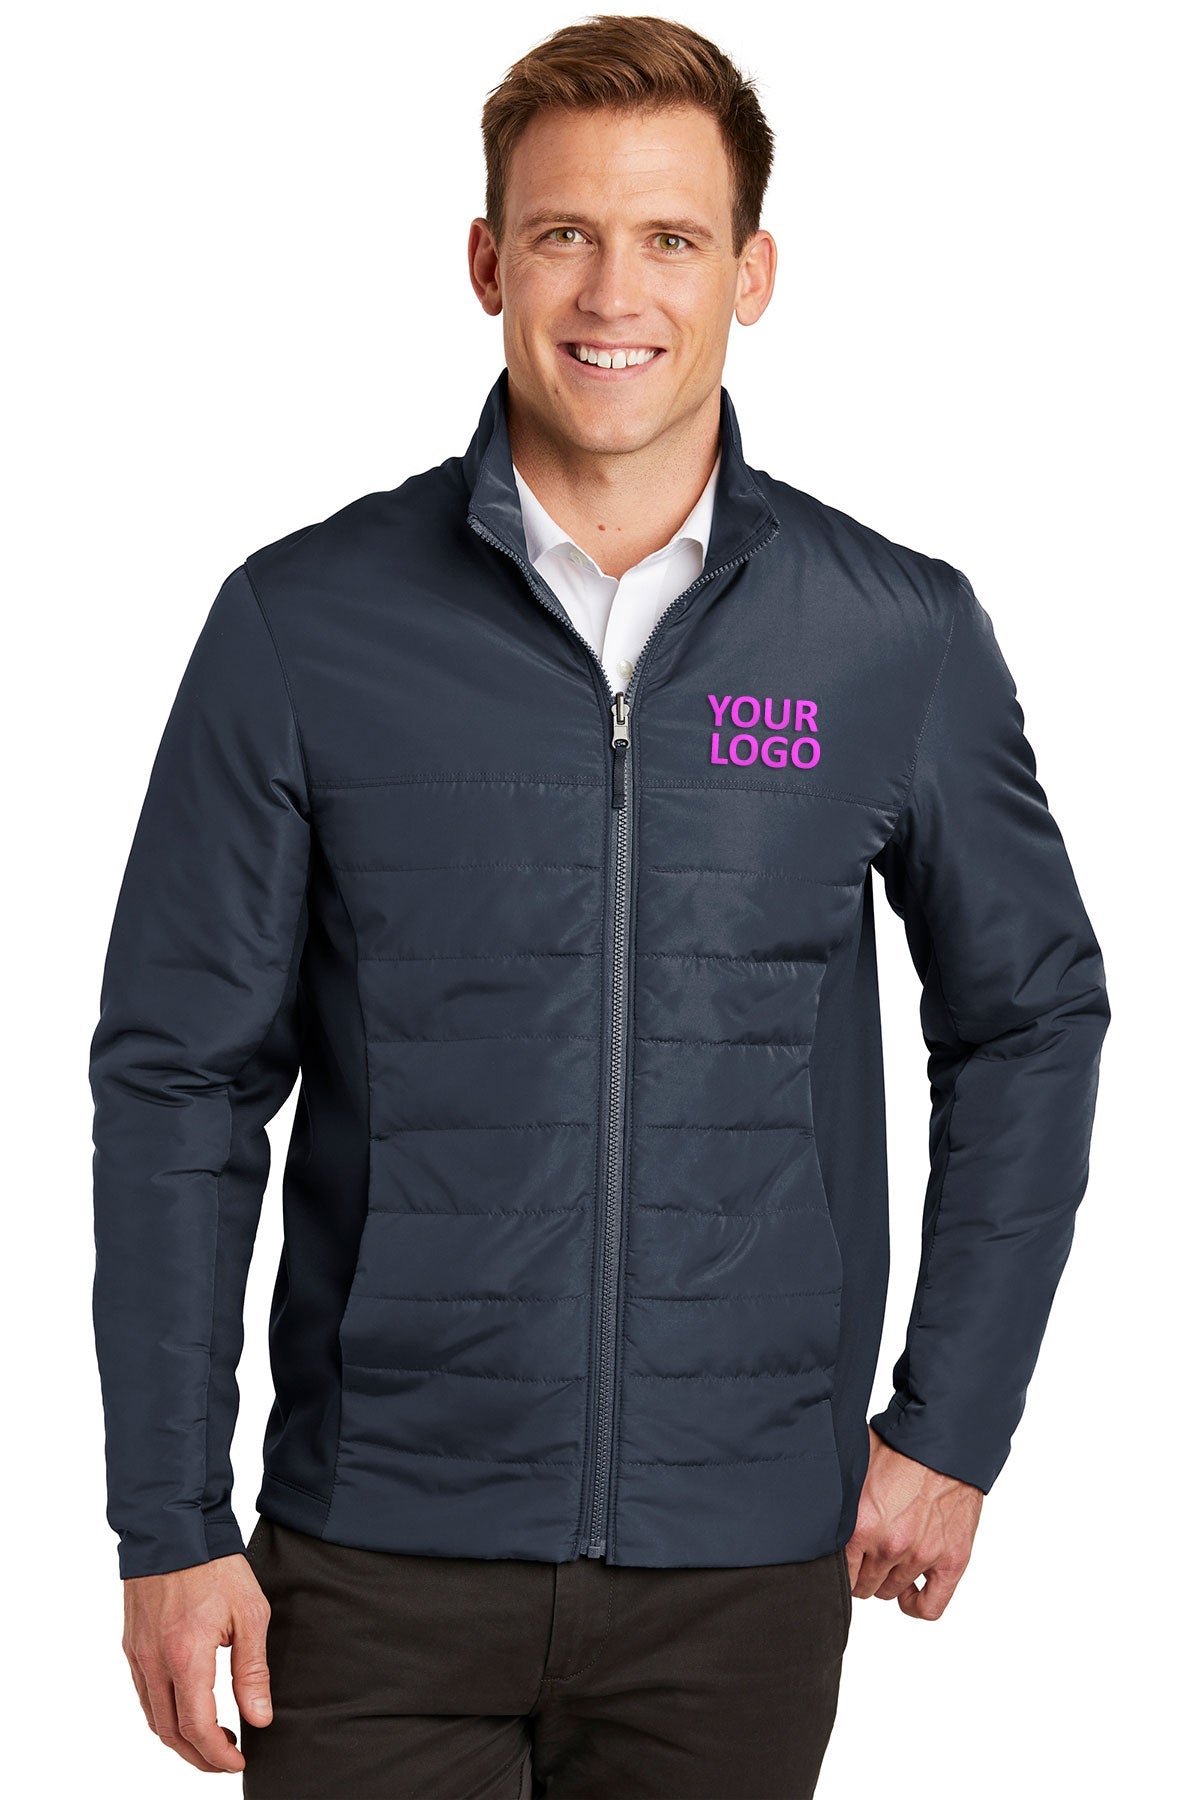 Port Authority River Blue J902 business jackets with logo